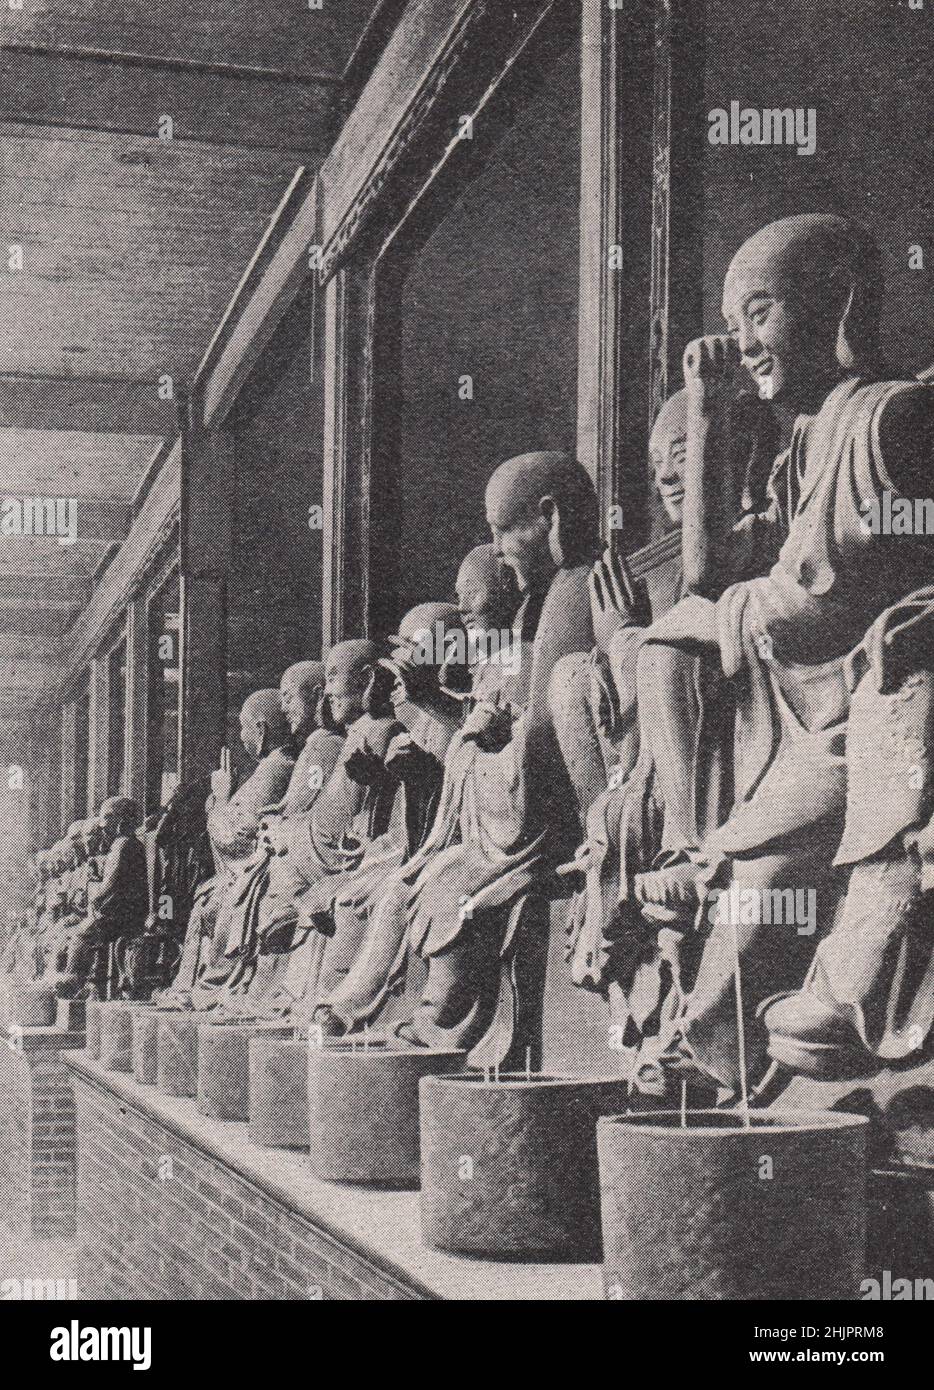 Carven images in a Buddhist temple. China. Canton Guangzhou (1923) Stock Photo